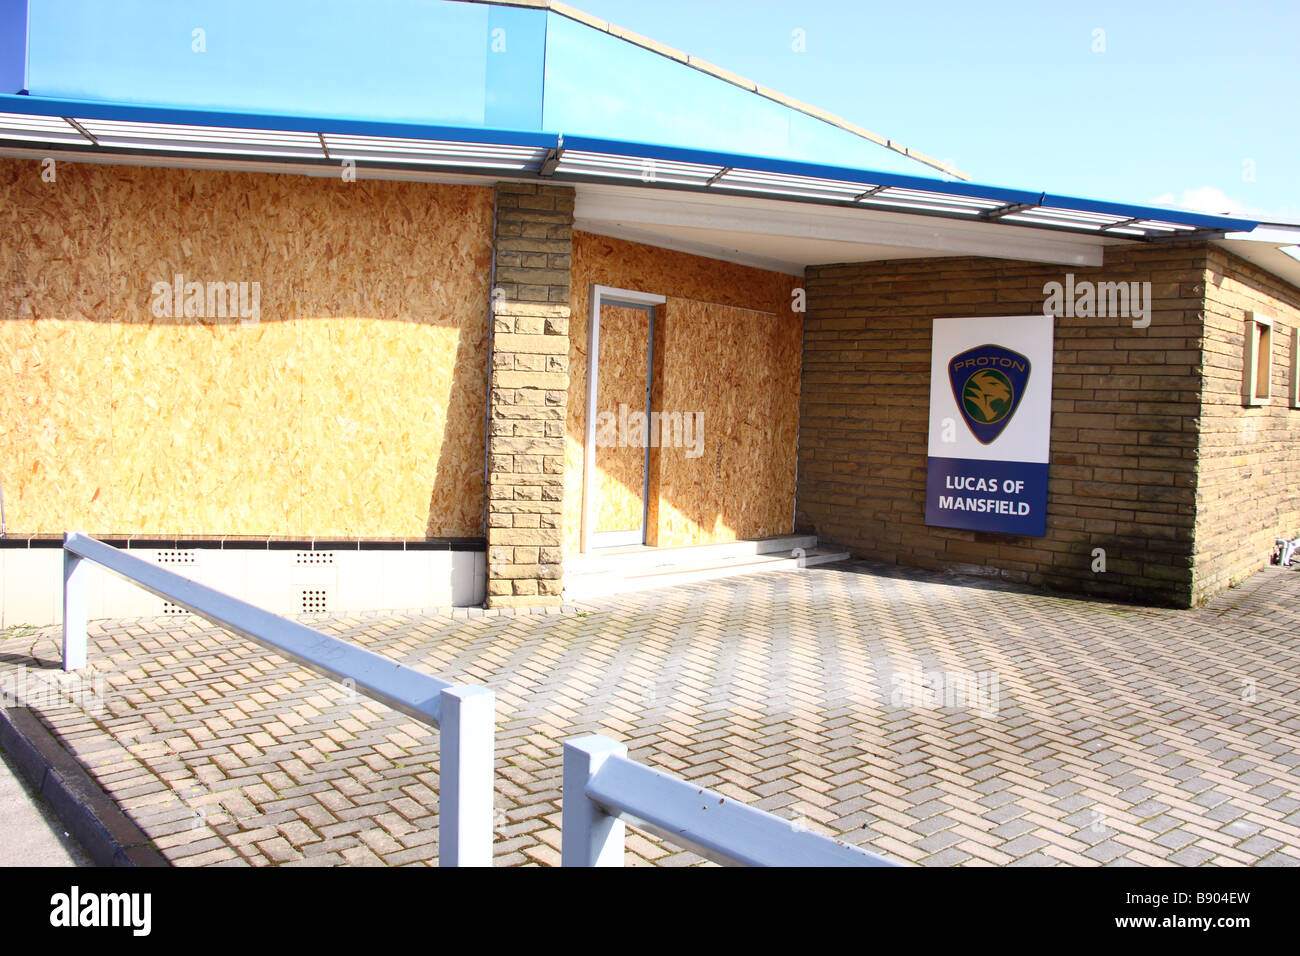 proton car dealership mansfield boarded up and closed down Stock Photo